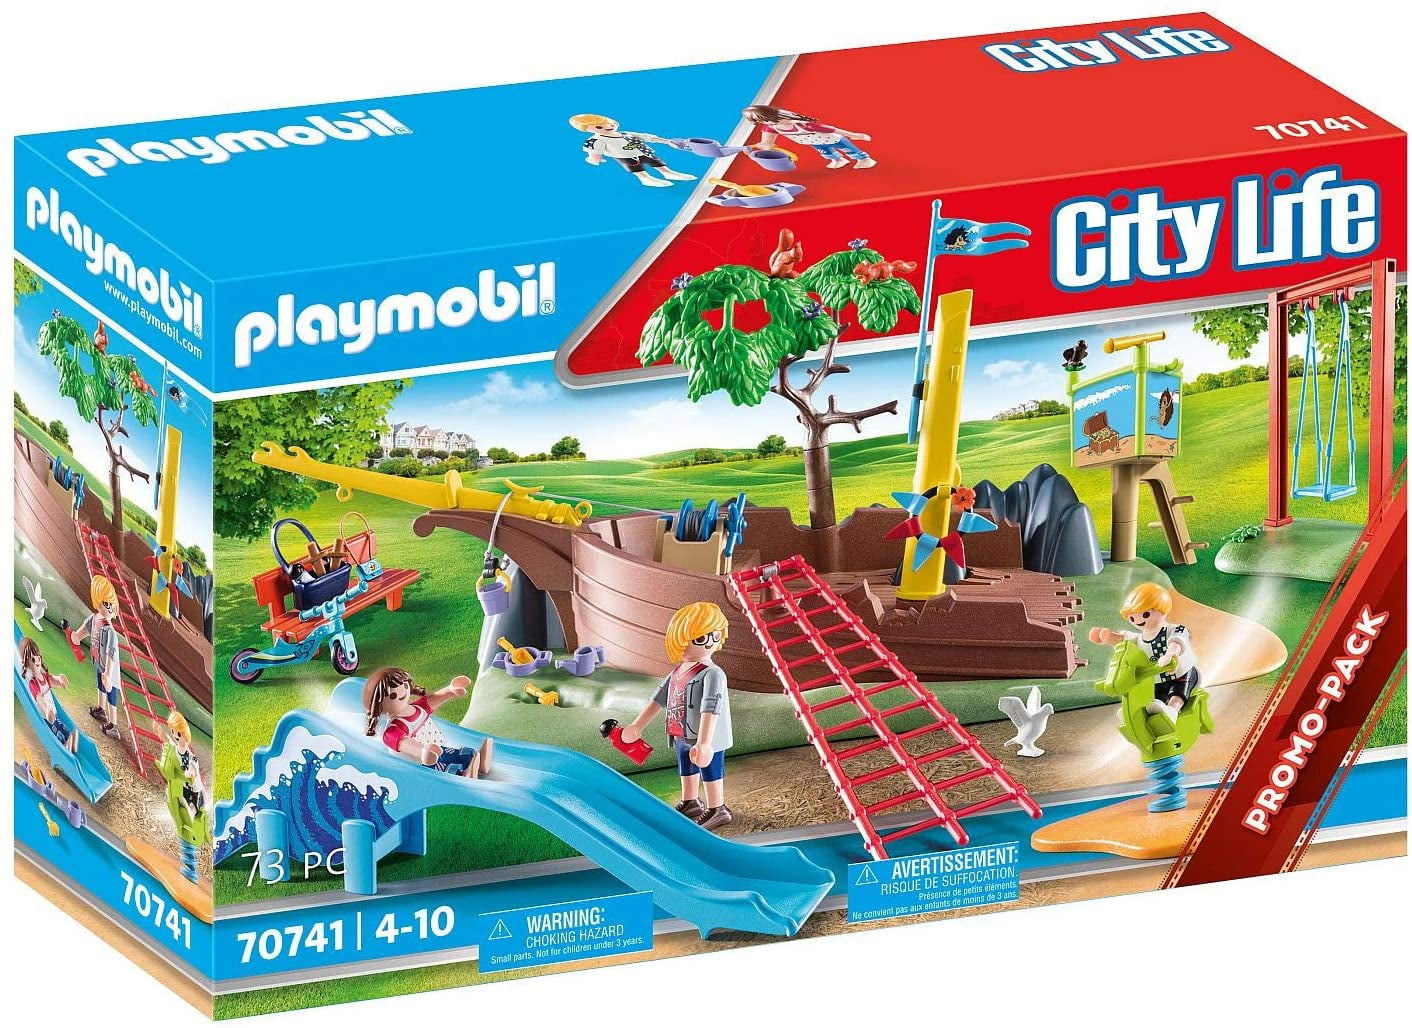 Megalopolis Skærm faktor Mouse over image for larger view PLAYMOBIL City Life 70741 adventure  playground with shipwreck - Walmart.com